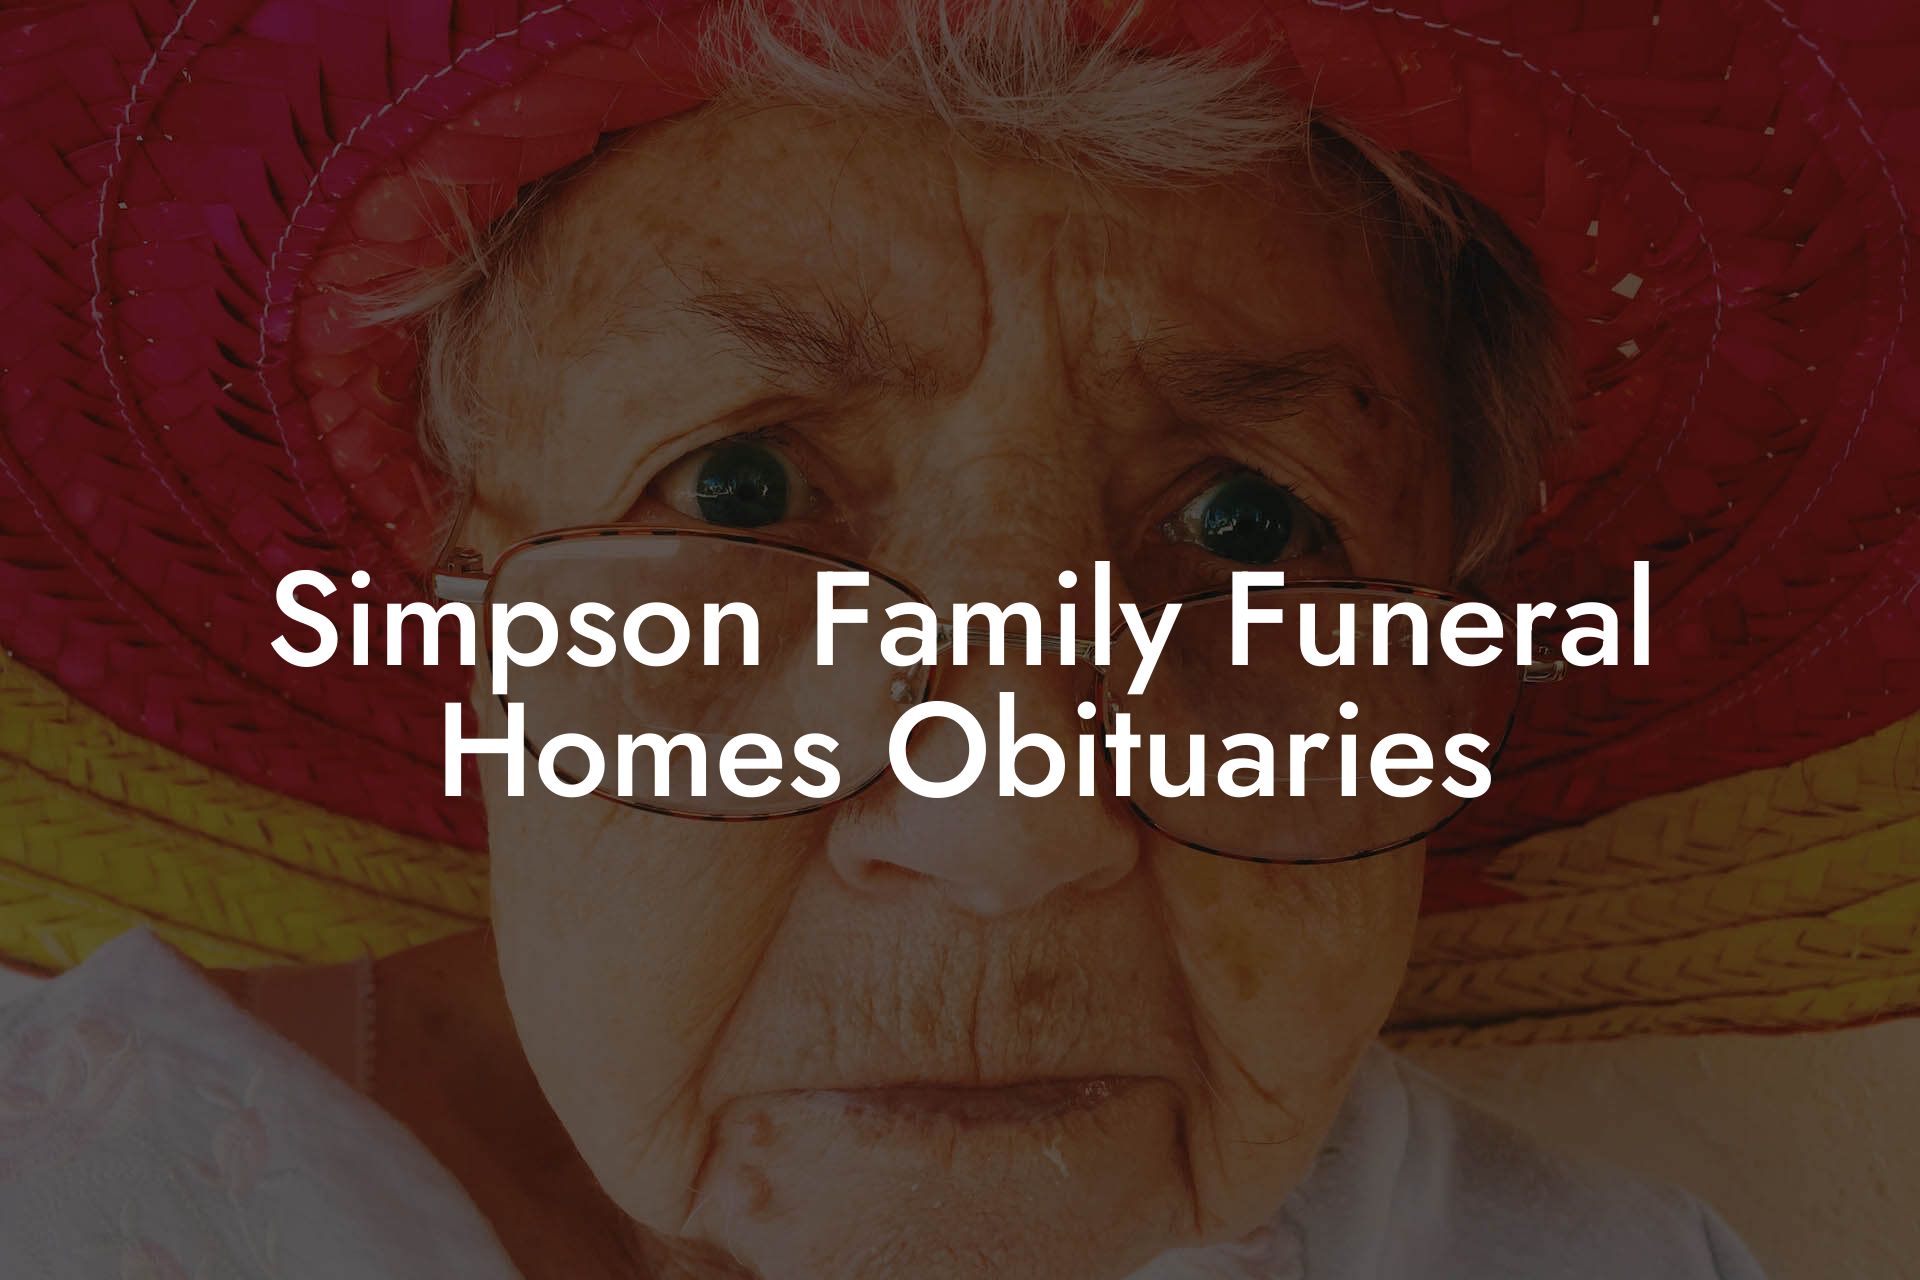 Simpson Family Funeral Homes Obituaries